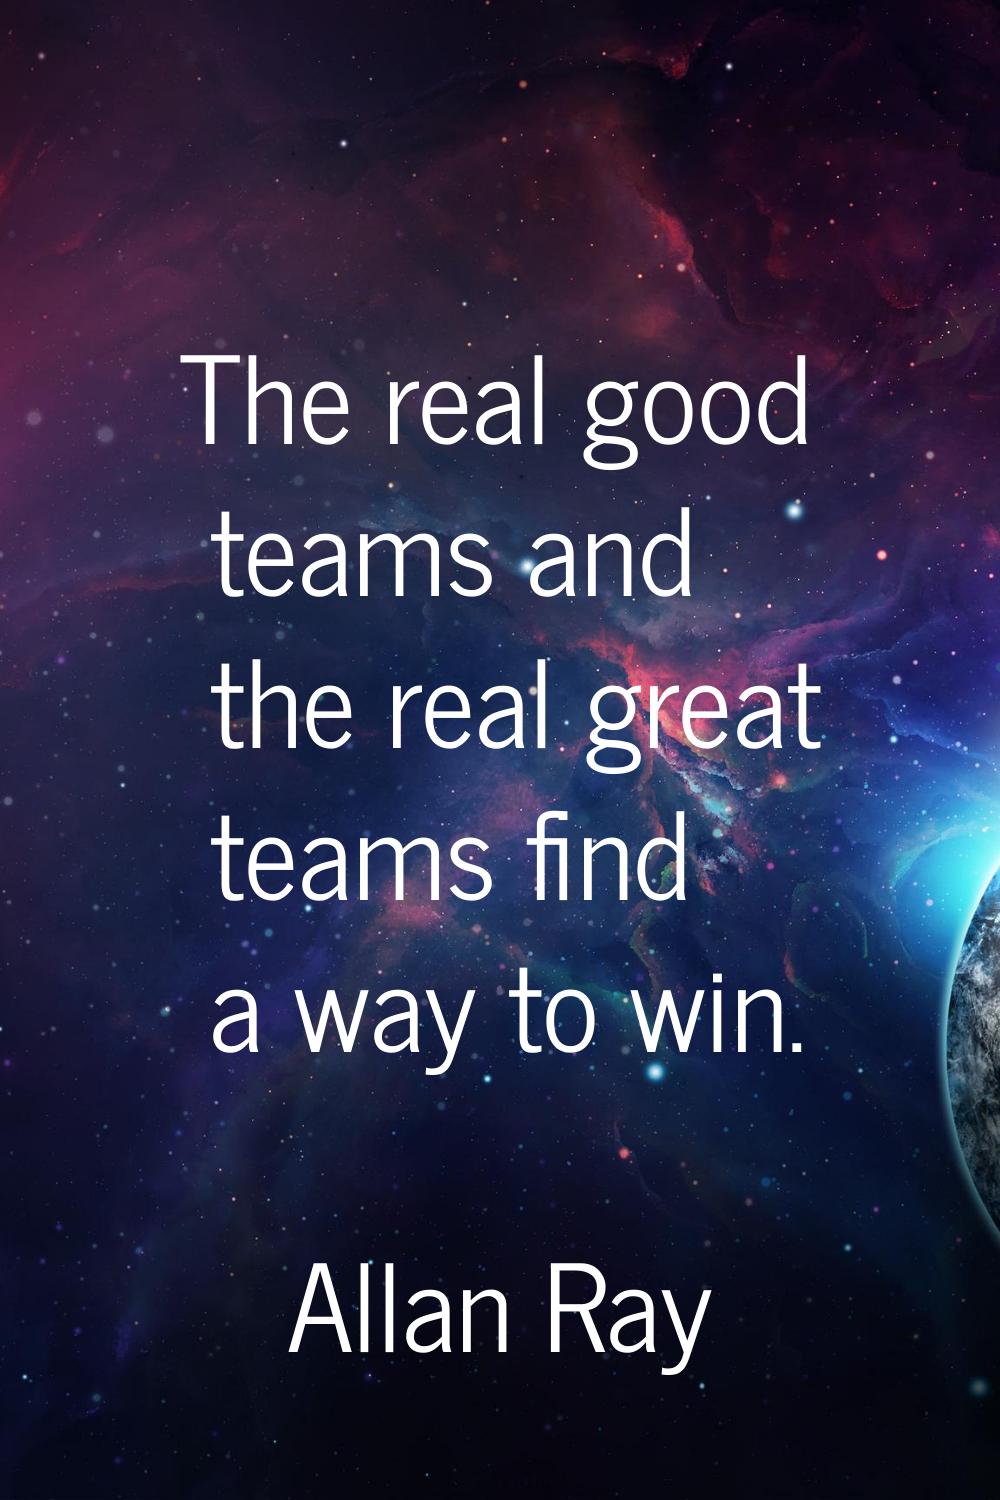 The real good teams and the real great teams find a way to win.